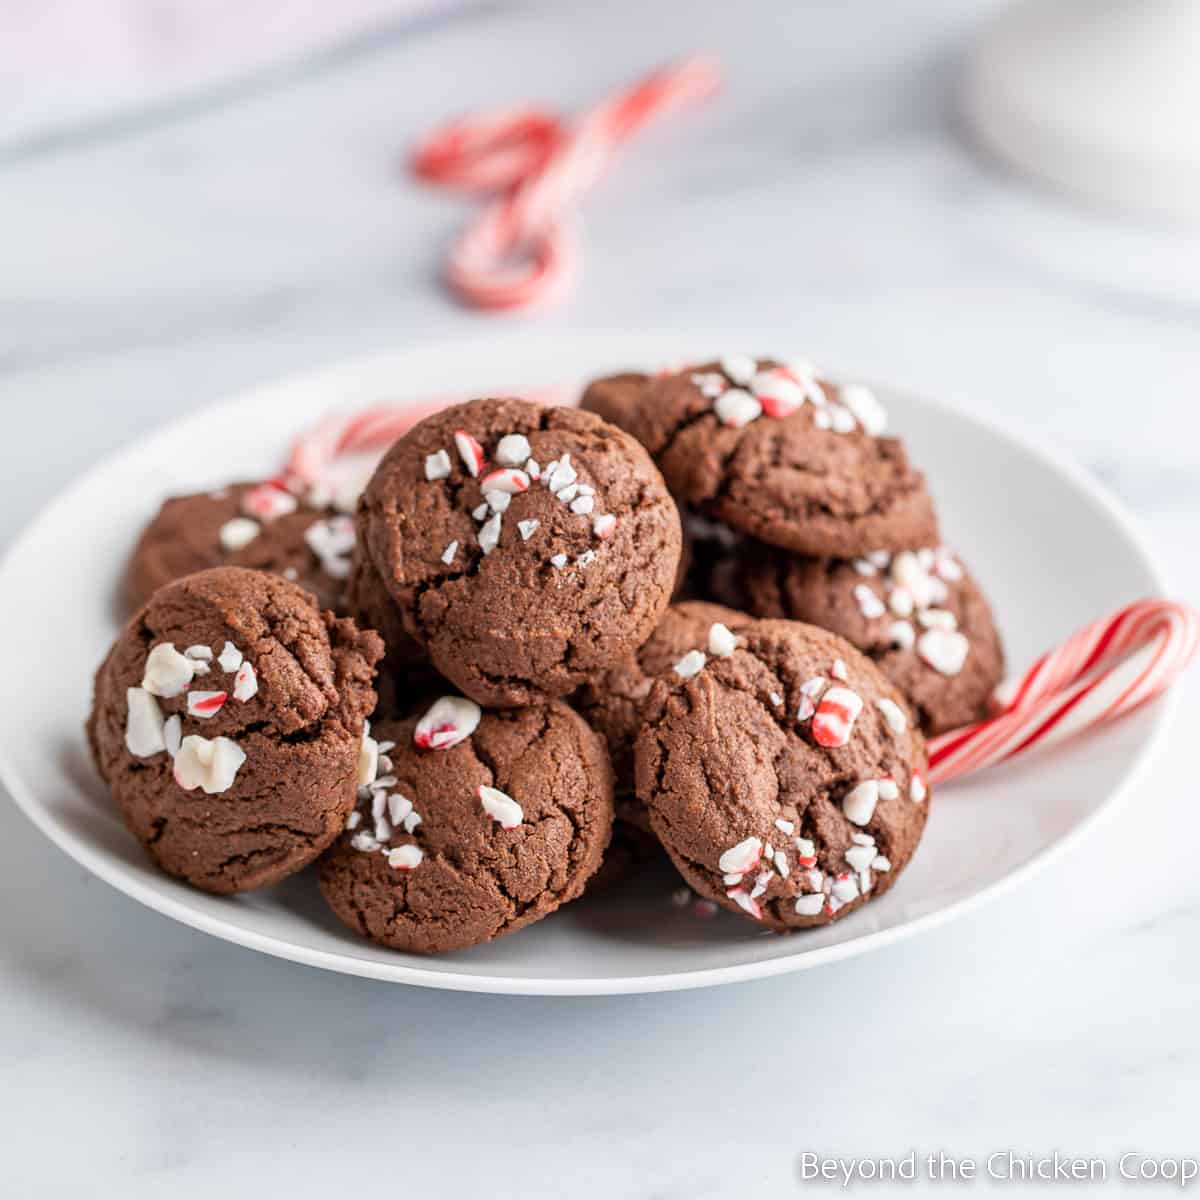 A plate filled with chocolate cookies topped with crushed peppermint candy.